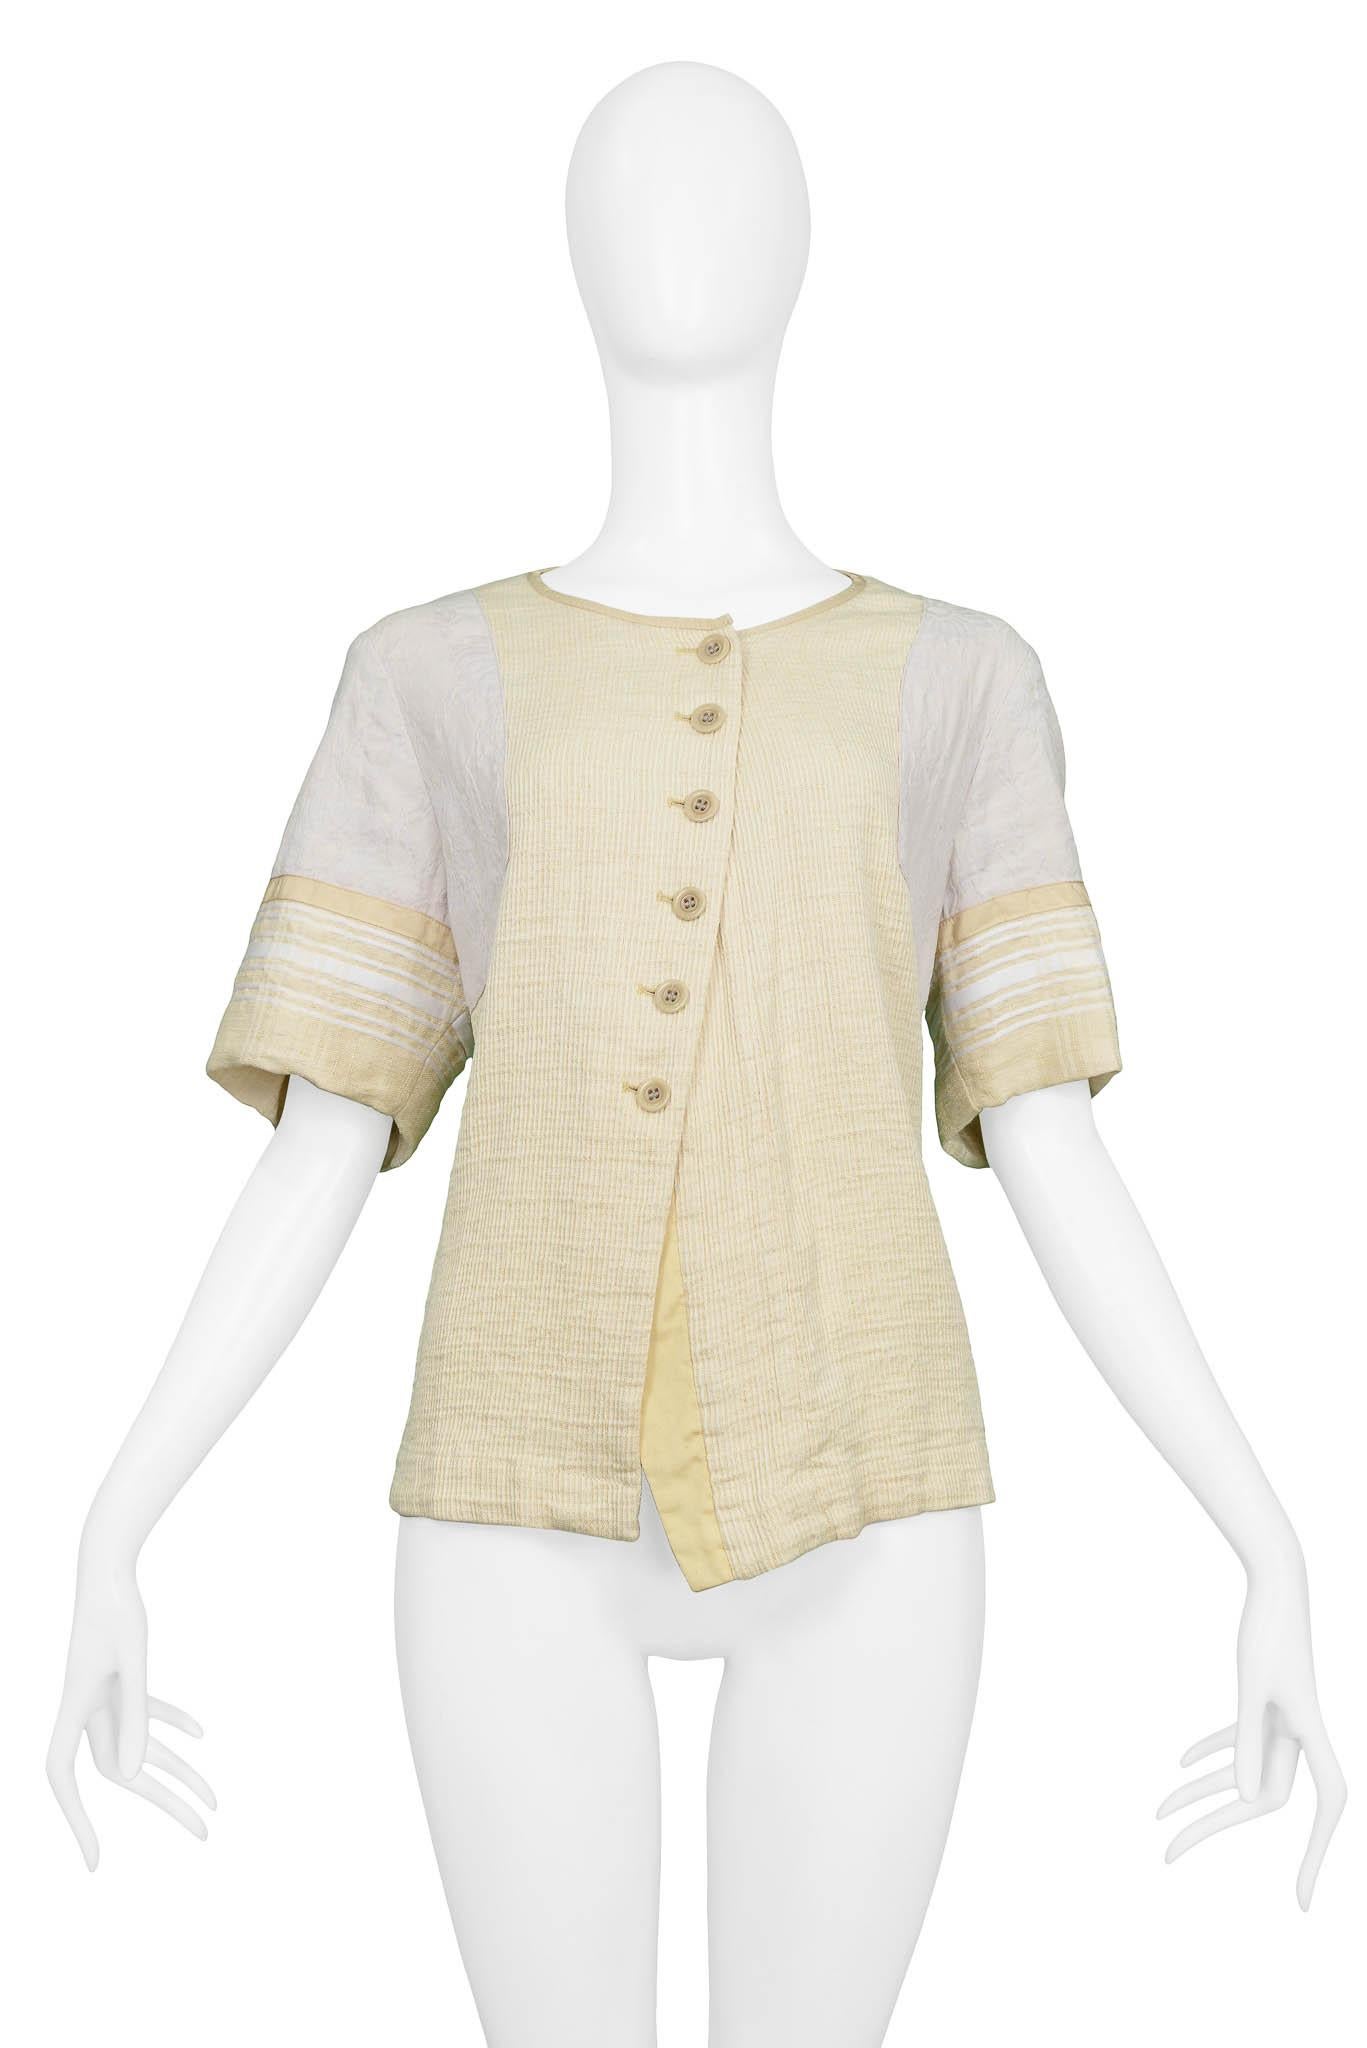 Resurrection Vintage is excited to offer a vintage Dries Van Noten ivory top featuring an asymmetrical front, button front closure, and multi-colored sleeves.

Dries Van Noten
Size 44
Excellent Vintage Condition
Authenticity Guaranteed